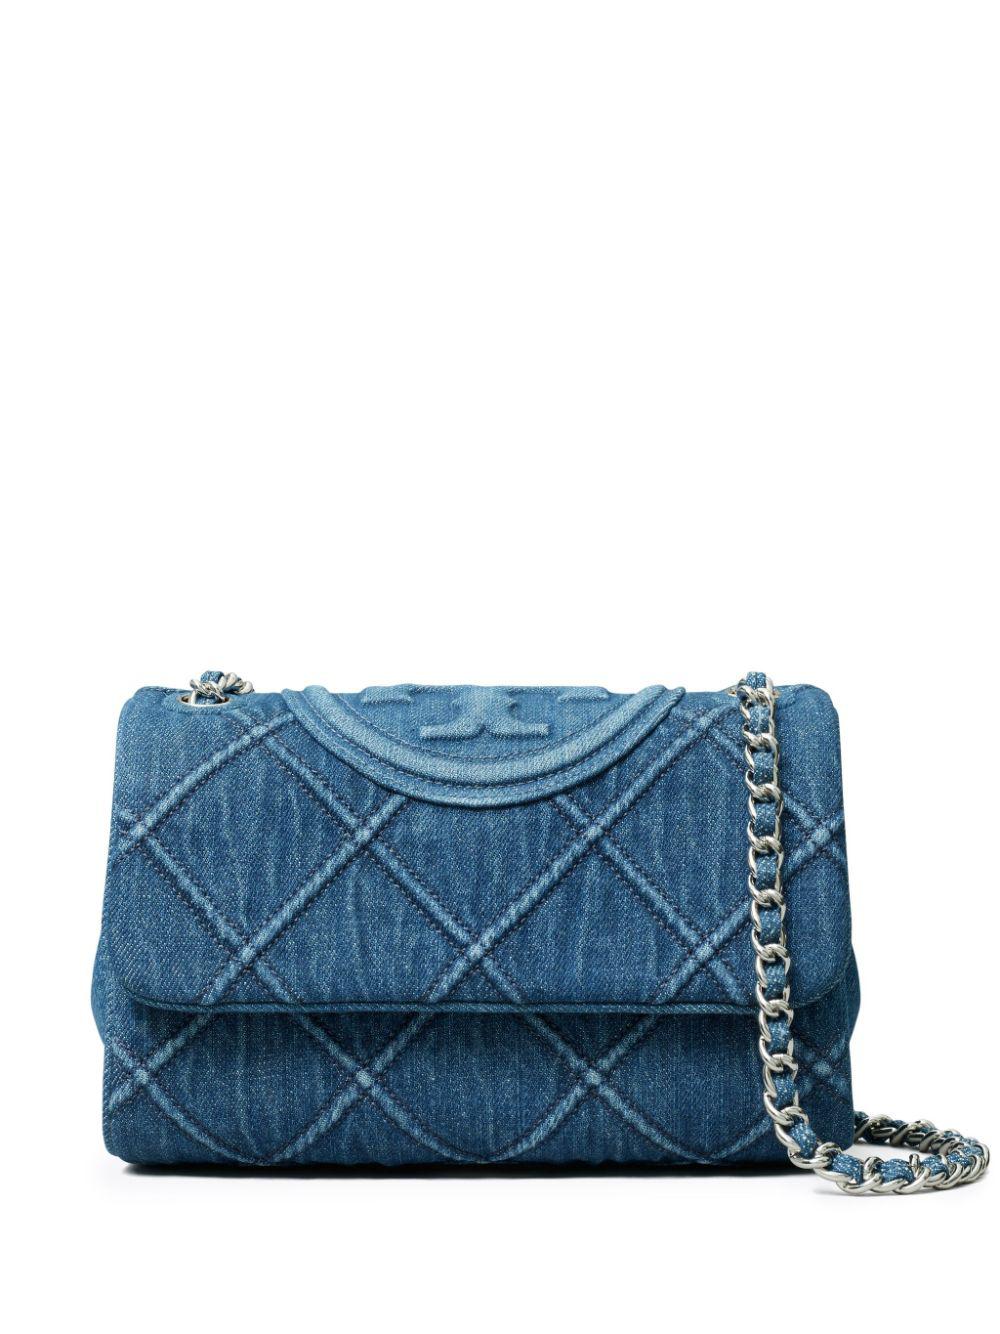 TORY BURCH Quilted Cotton Denim Mini Shoulder Bag with Chain Strap in Light Blue, 22x15x9 cm